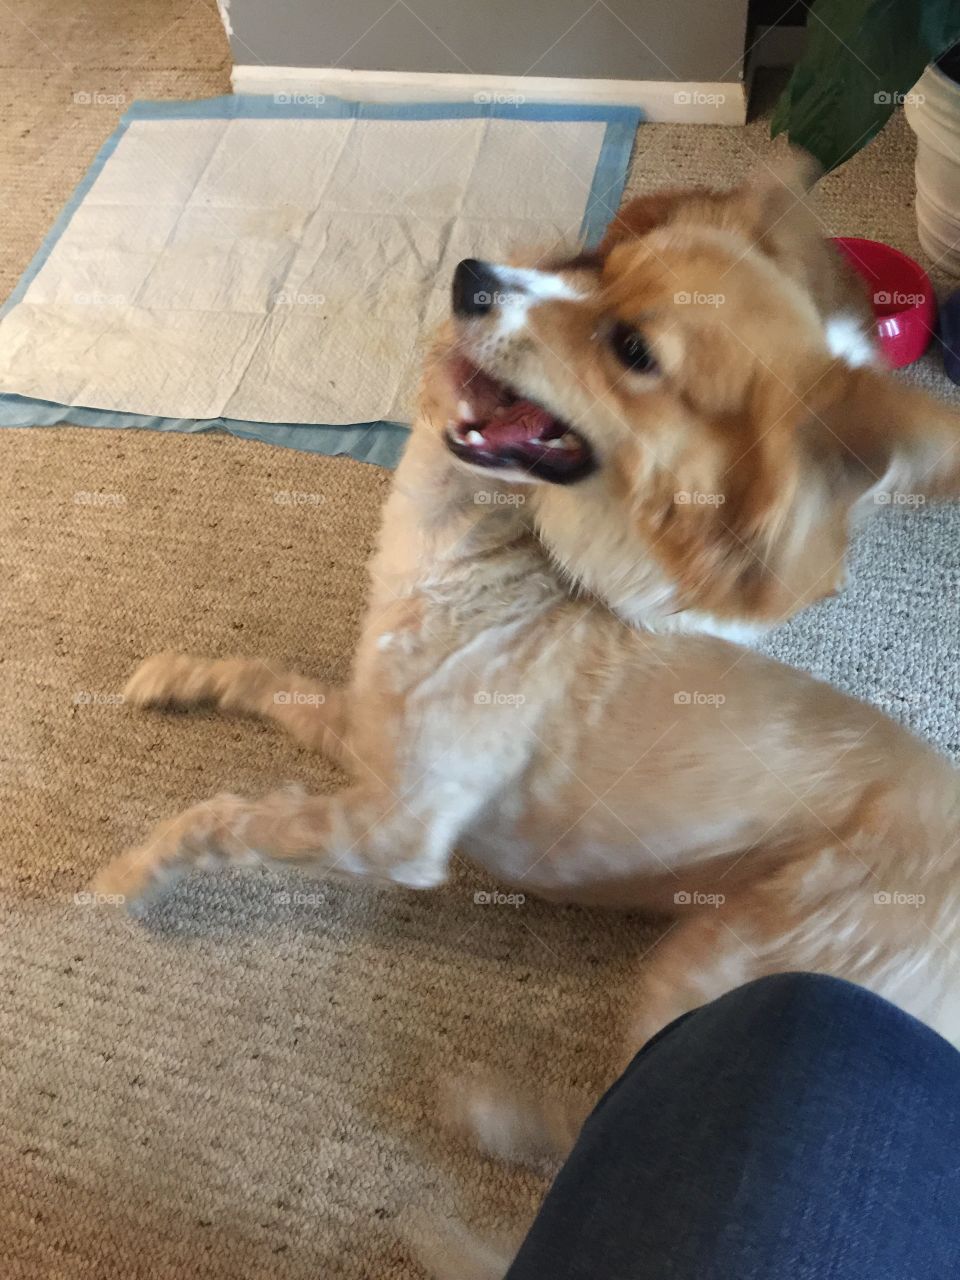 Cute corgi playing with a poodle cross dog.